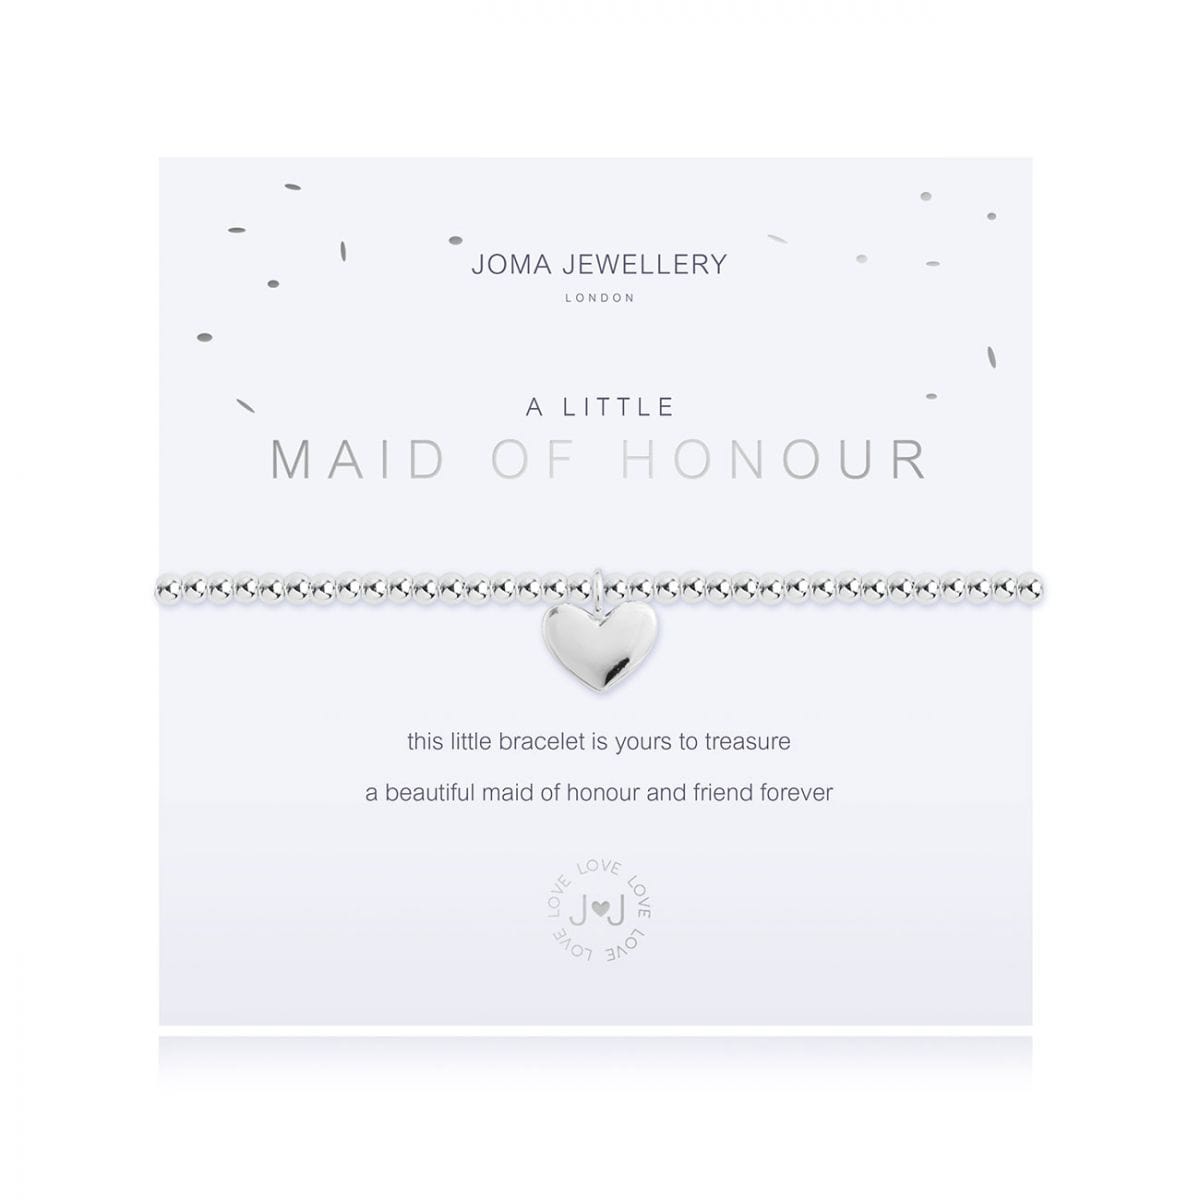 Joma Jewellery Bracelet Joma Jewellery Bracelet - A Little Maid of Honour